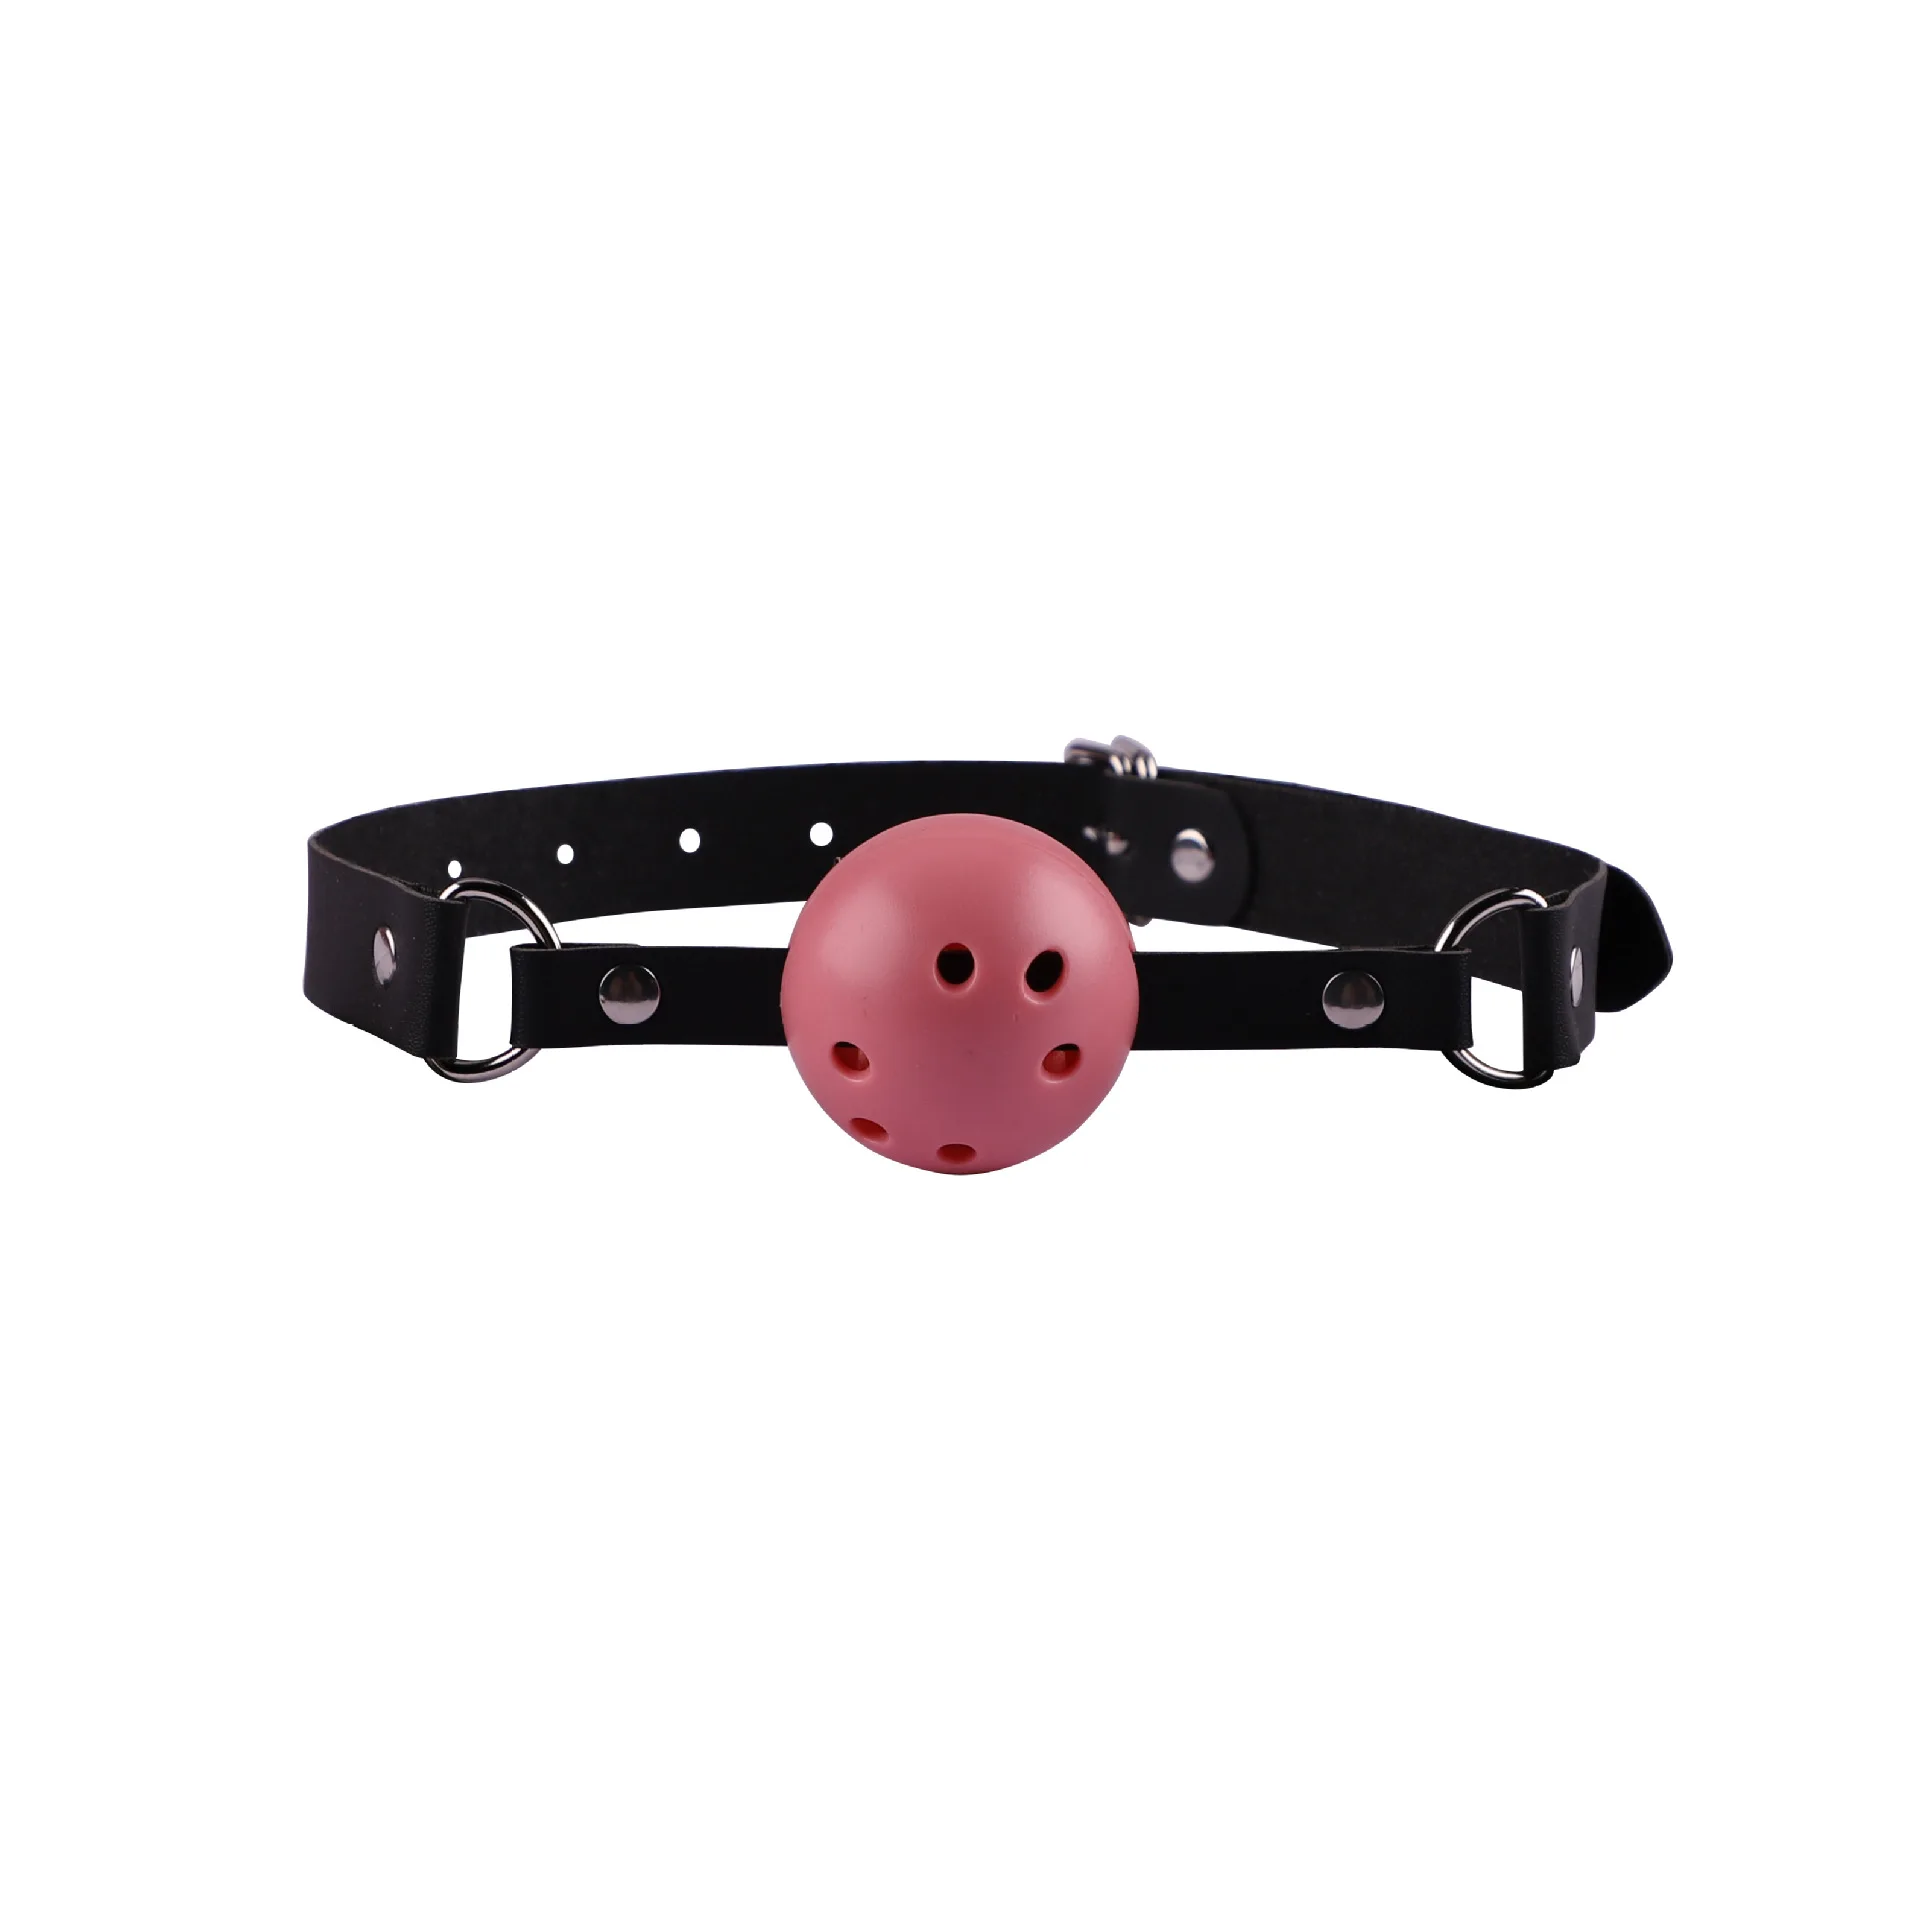 1PCS Adult Games Ball BDSM Bondage Restraints Open Mouth Breathable Sexy Ball Harness Strap Gag